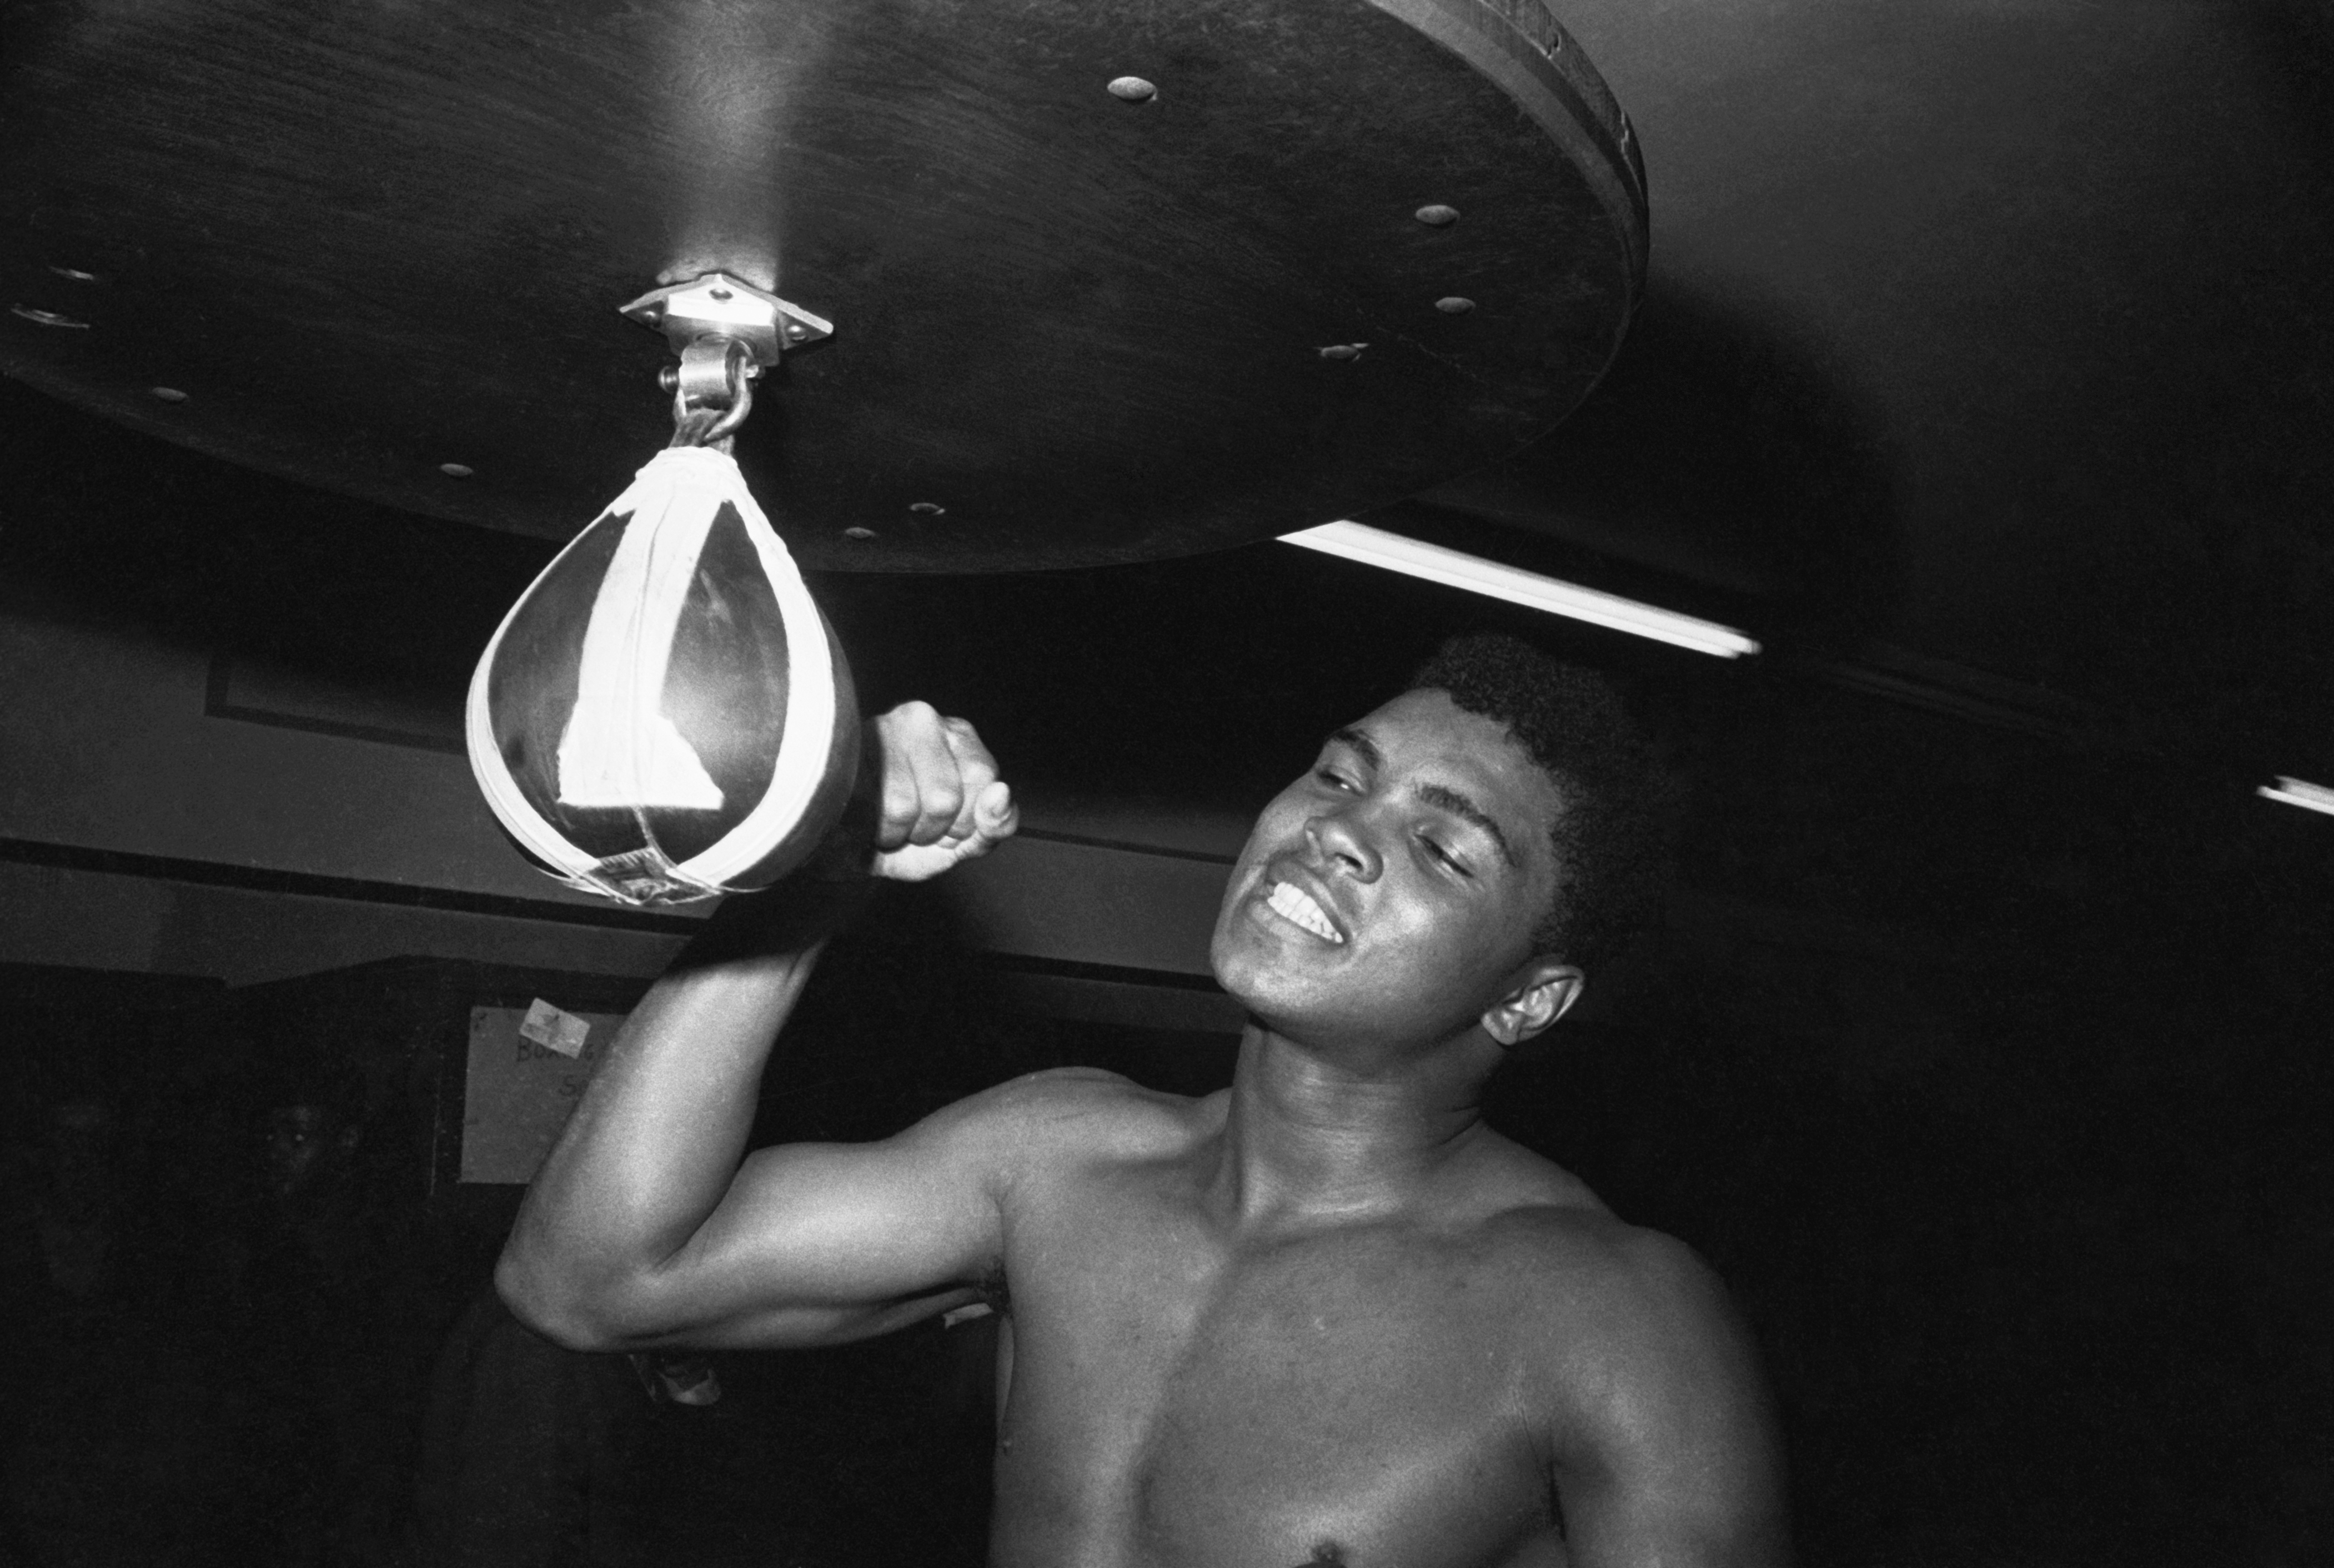 Muhammad Ali punches a bag